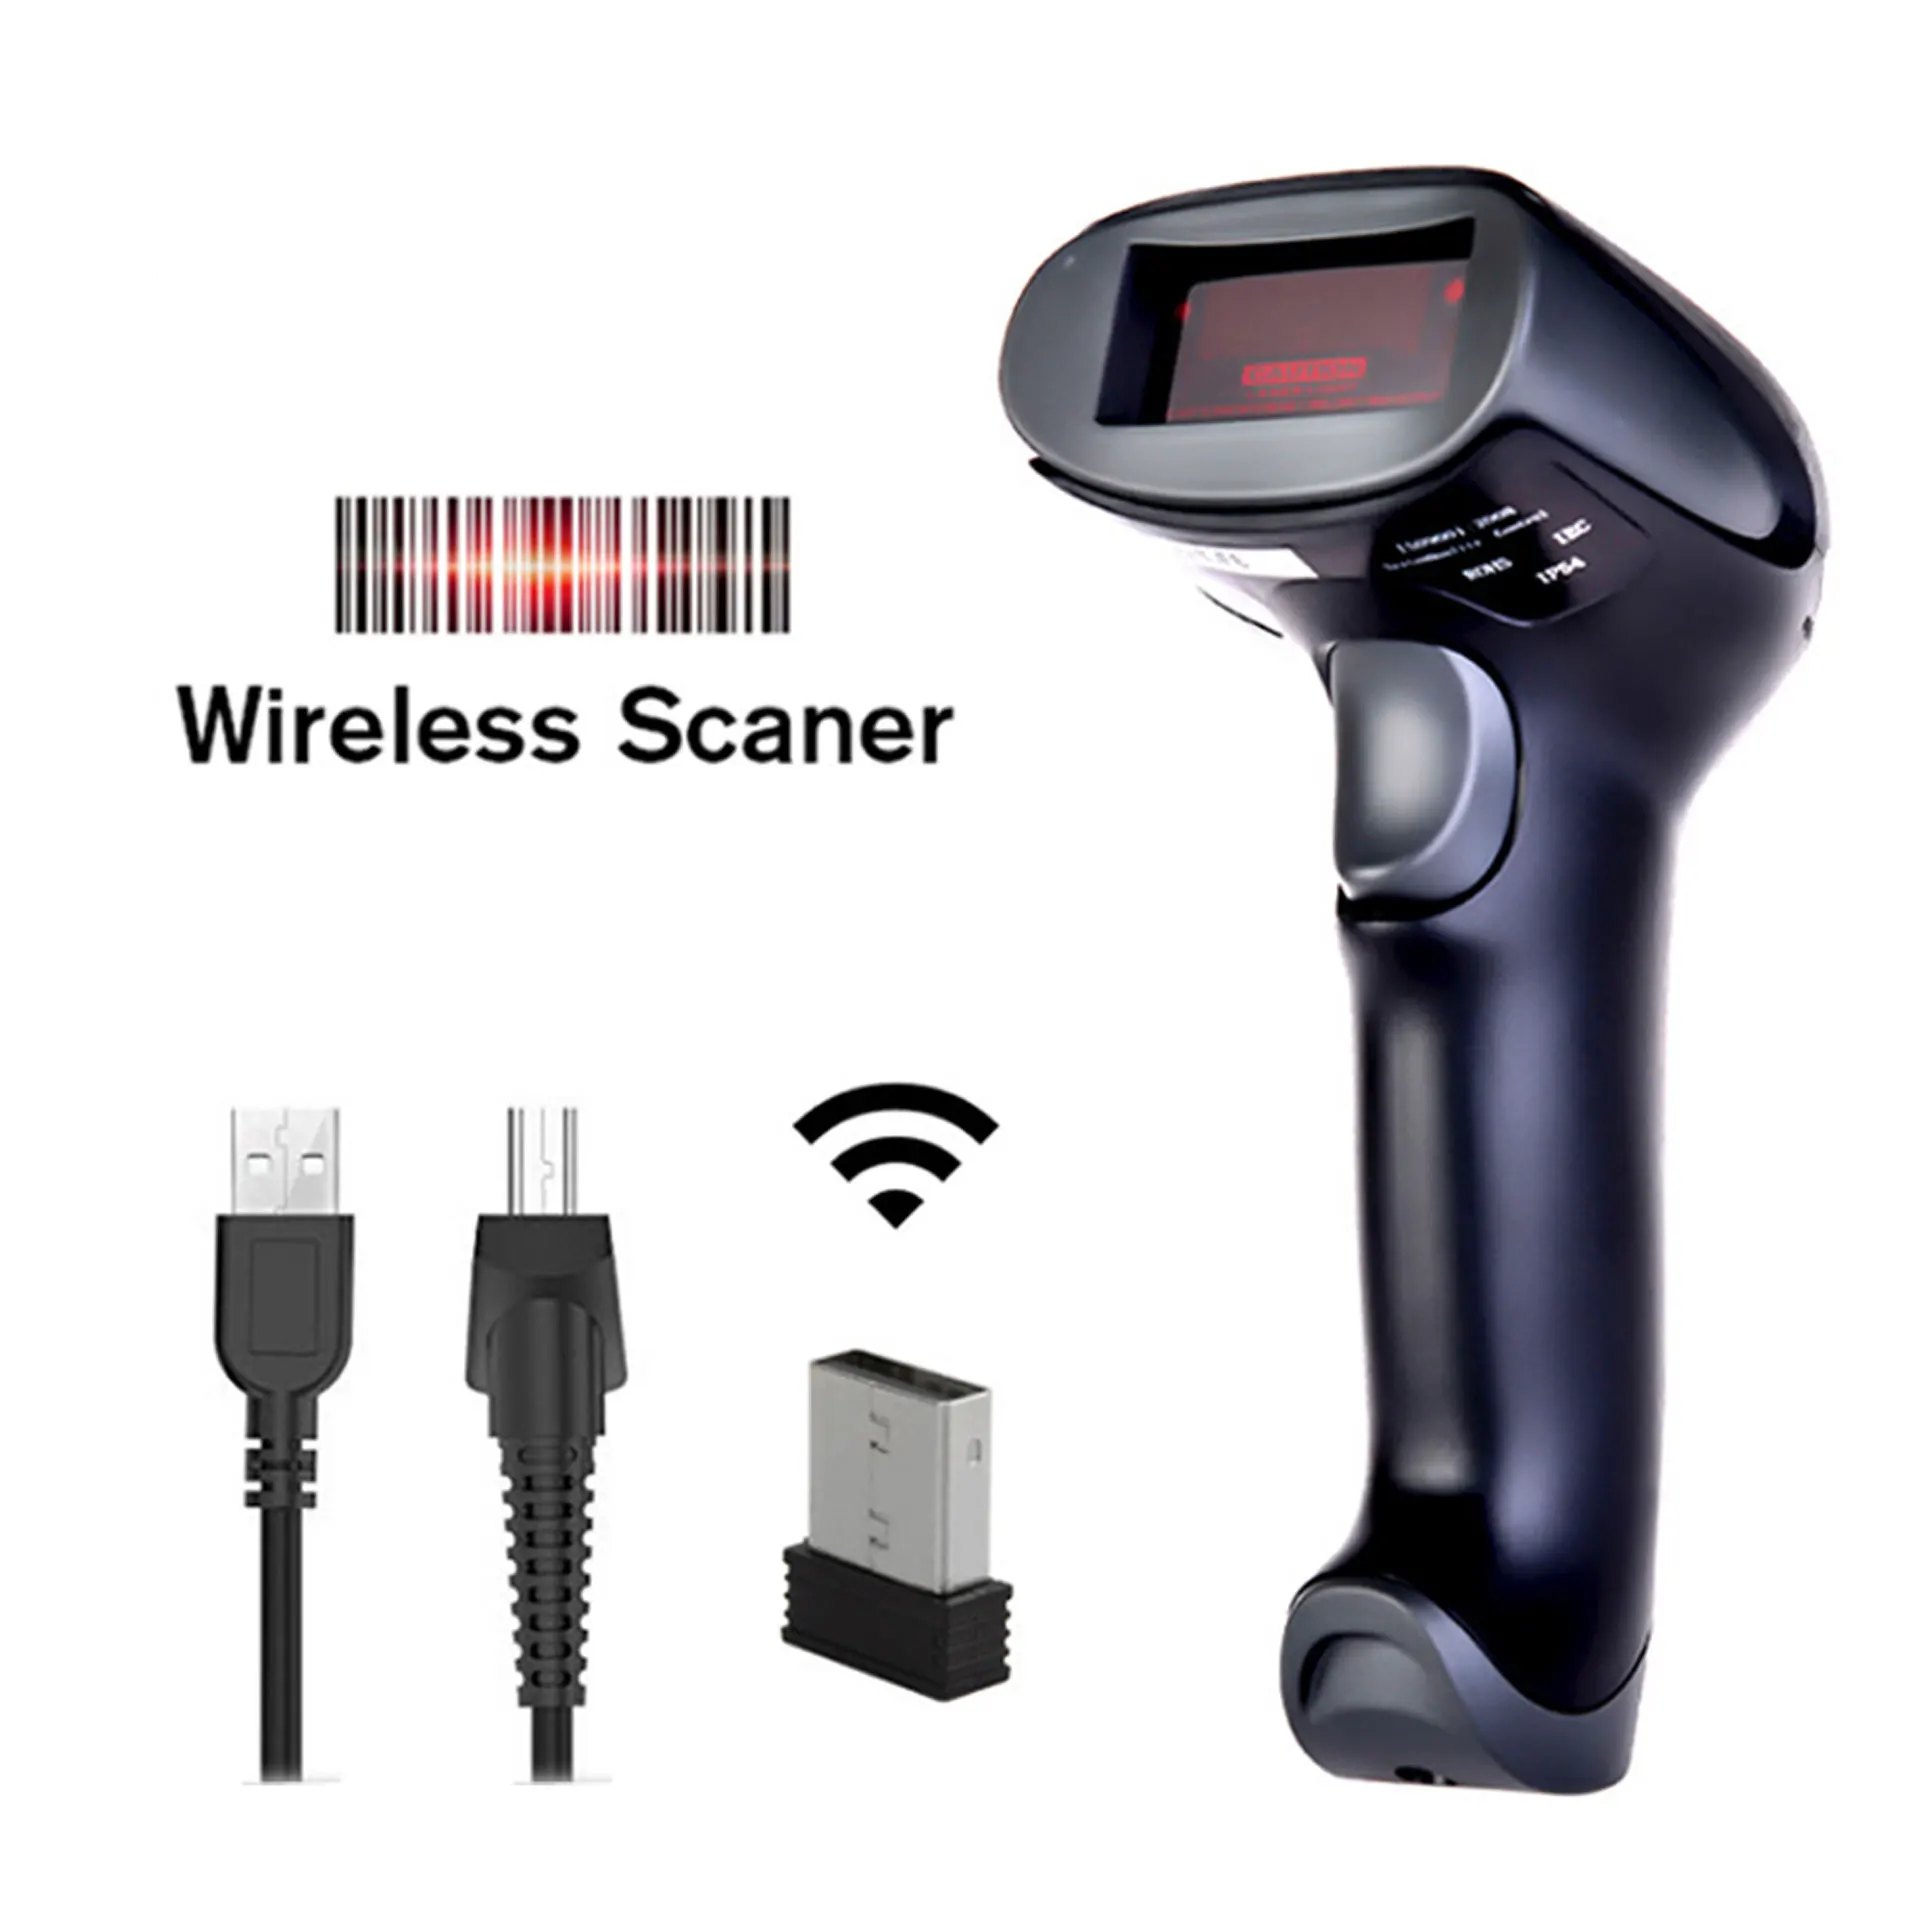 1000mA large capacity lithium battery laser wireless barcode scanner High sensitive wireless barcde reader for Supermarkets